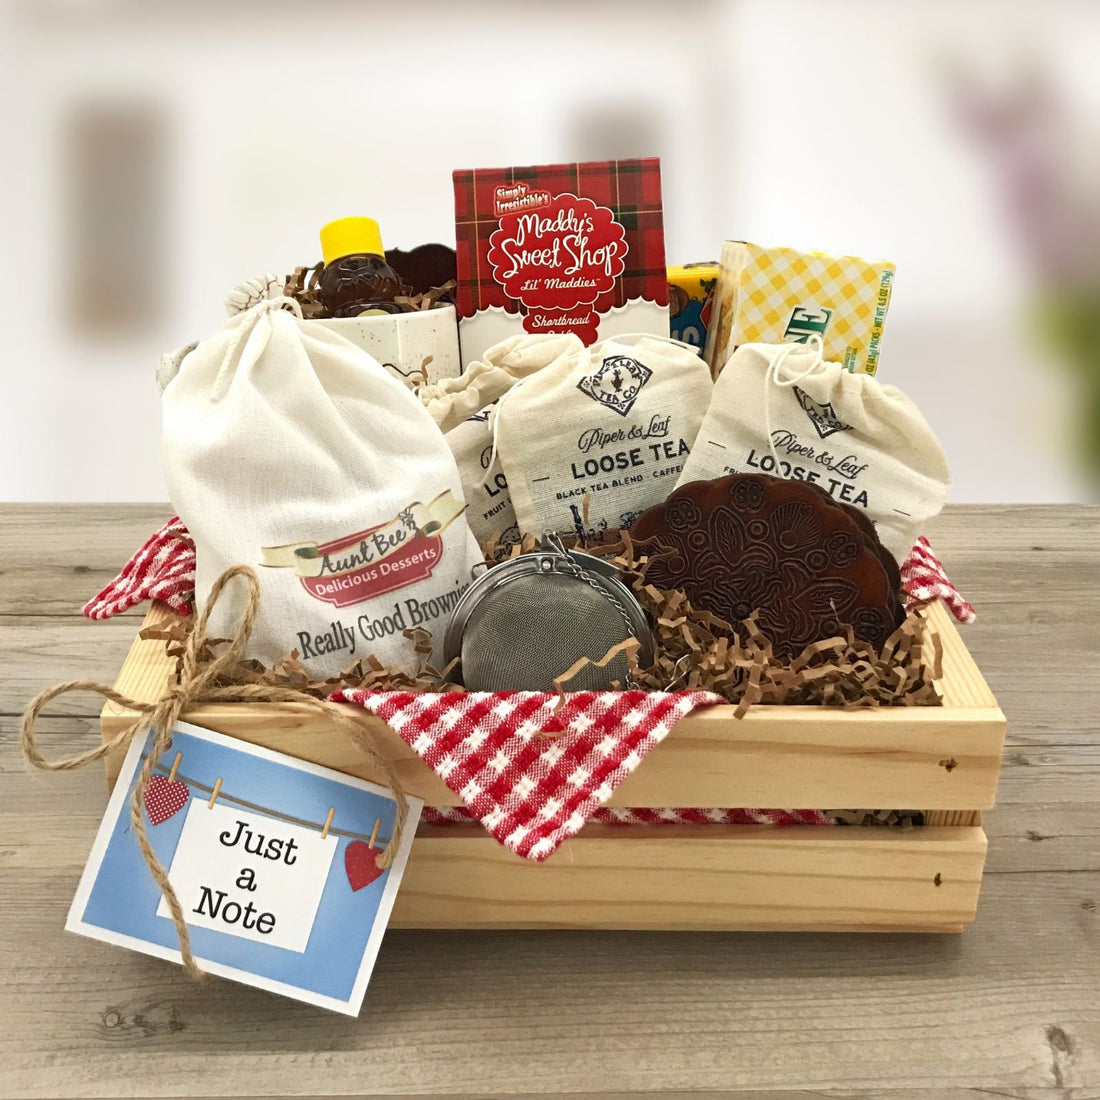 How to make personalized gift baskets for multiple recipients